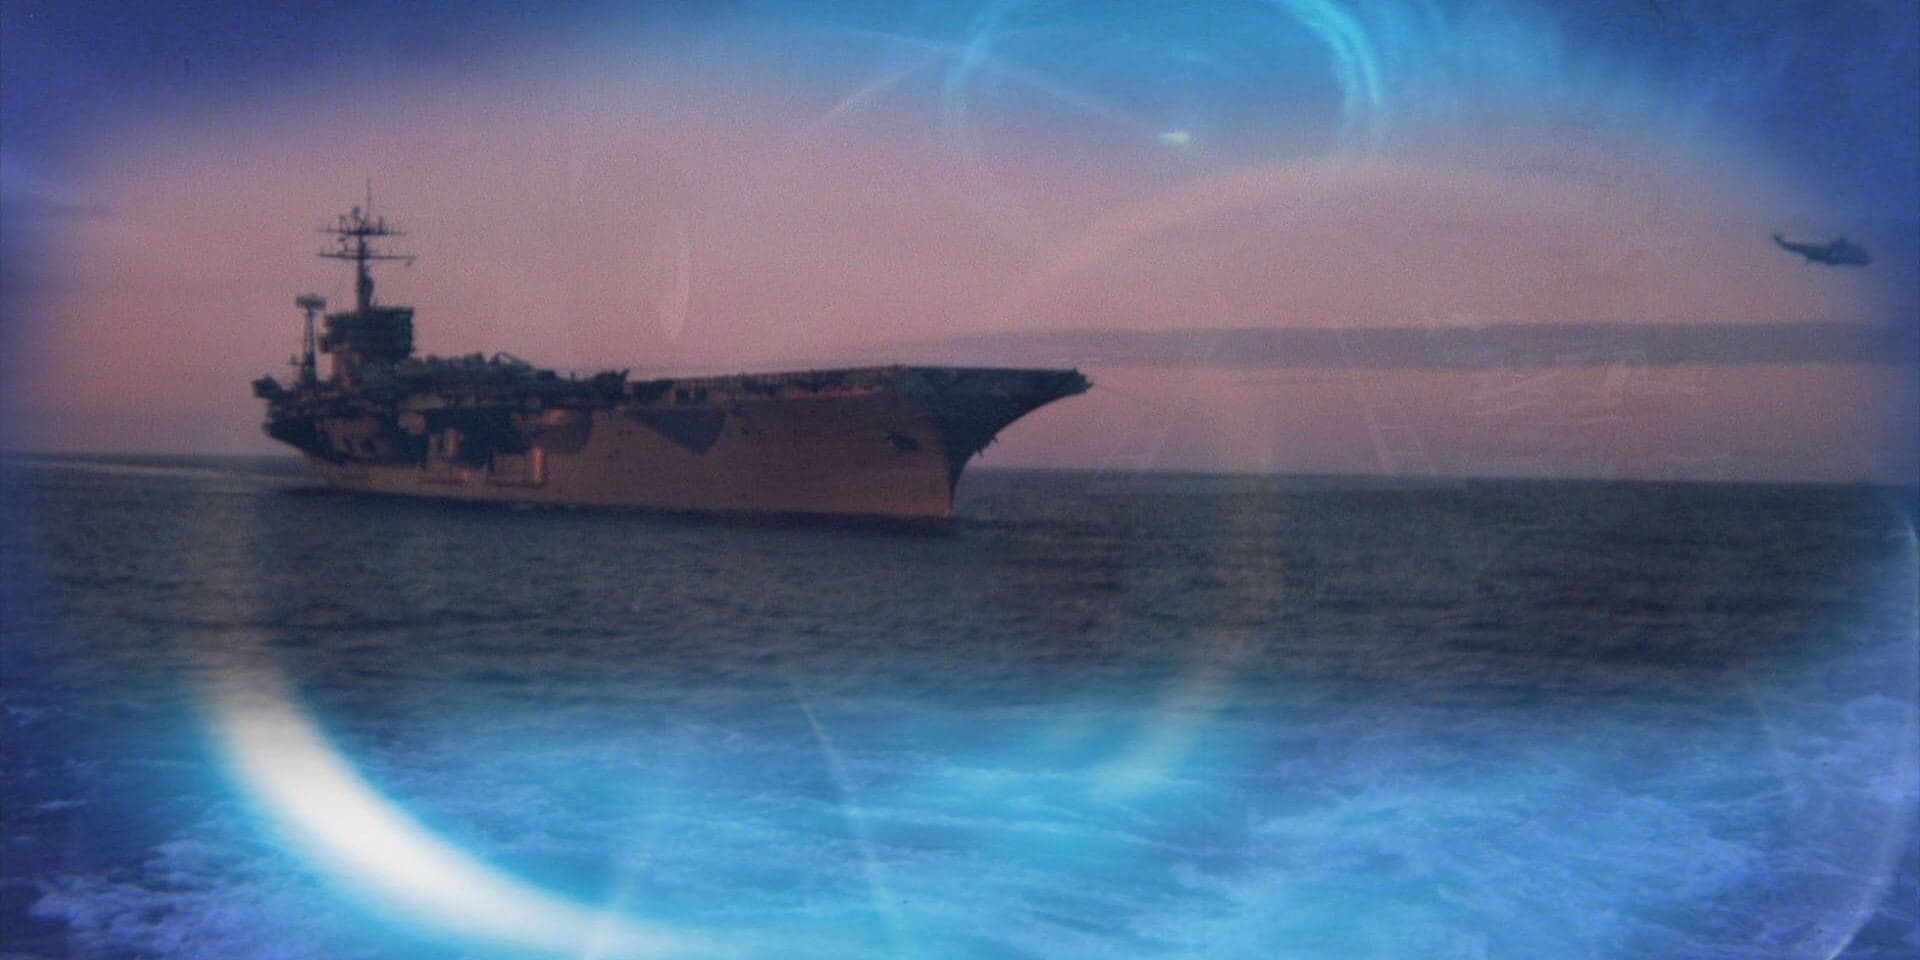 movie time travel aircraft carrier